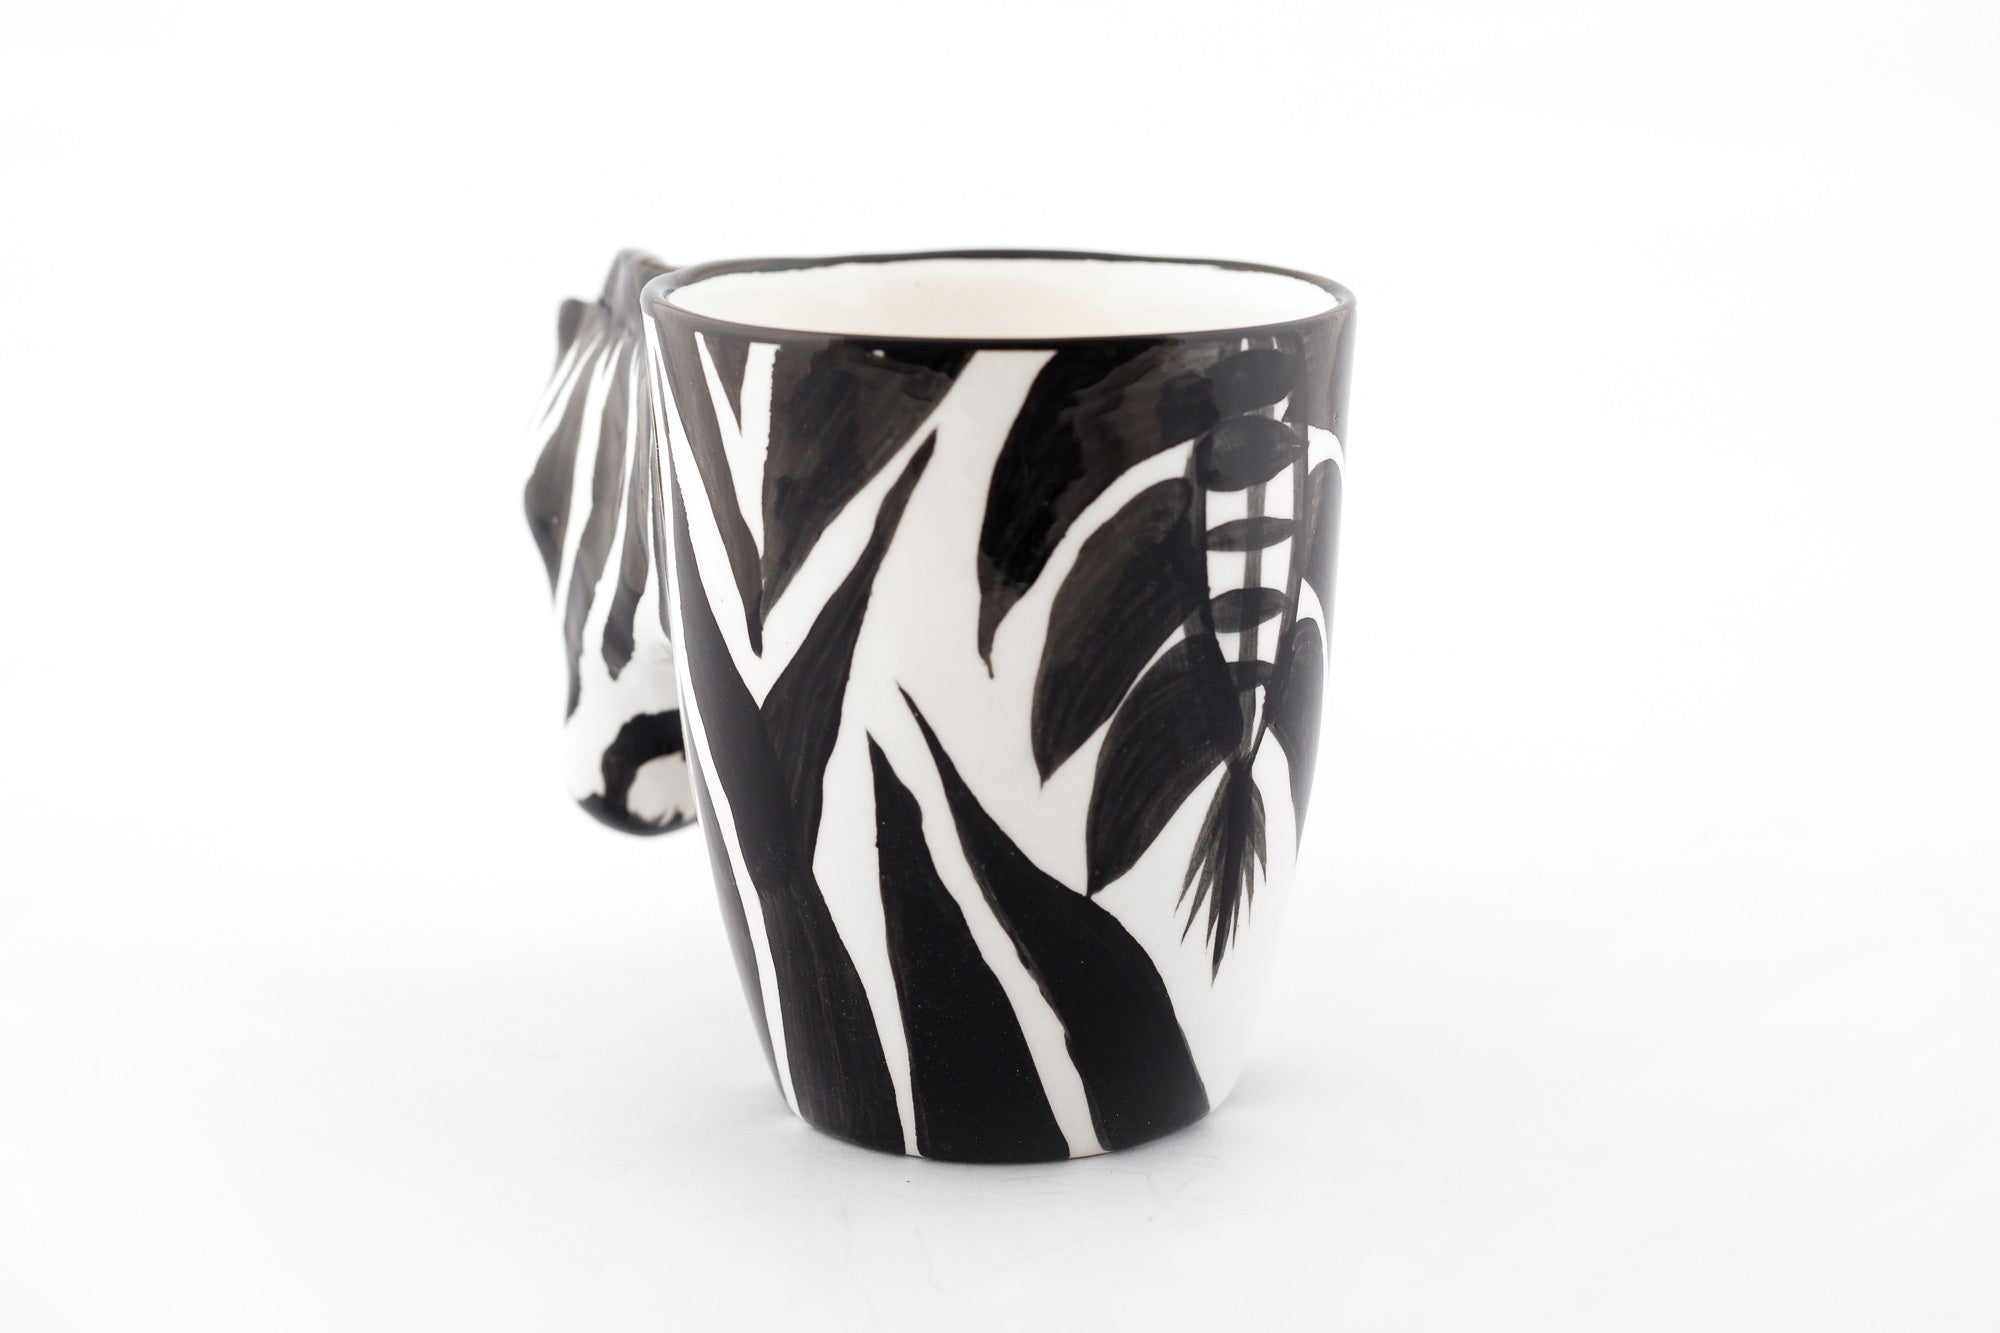 Back side of the ceramic Zebra coffee mug. White mug painted in zebra print with a zebra head for the handle and the back side shows the tail painted on the mug. Attention to detail!